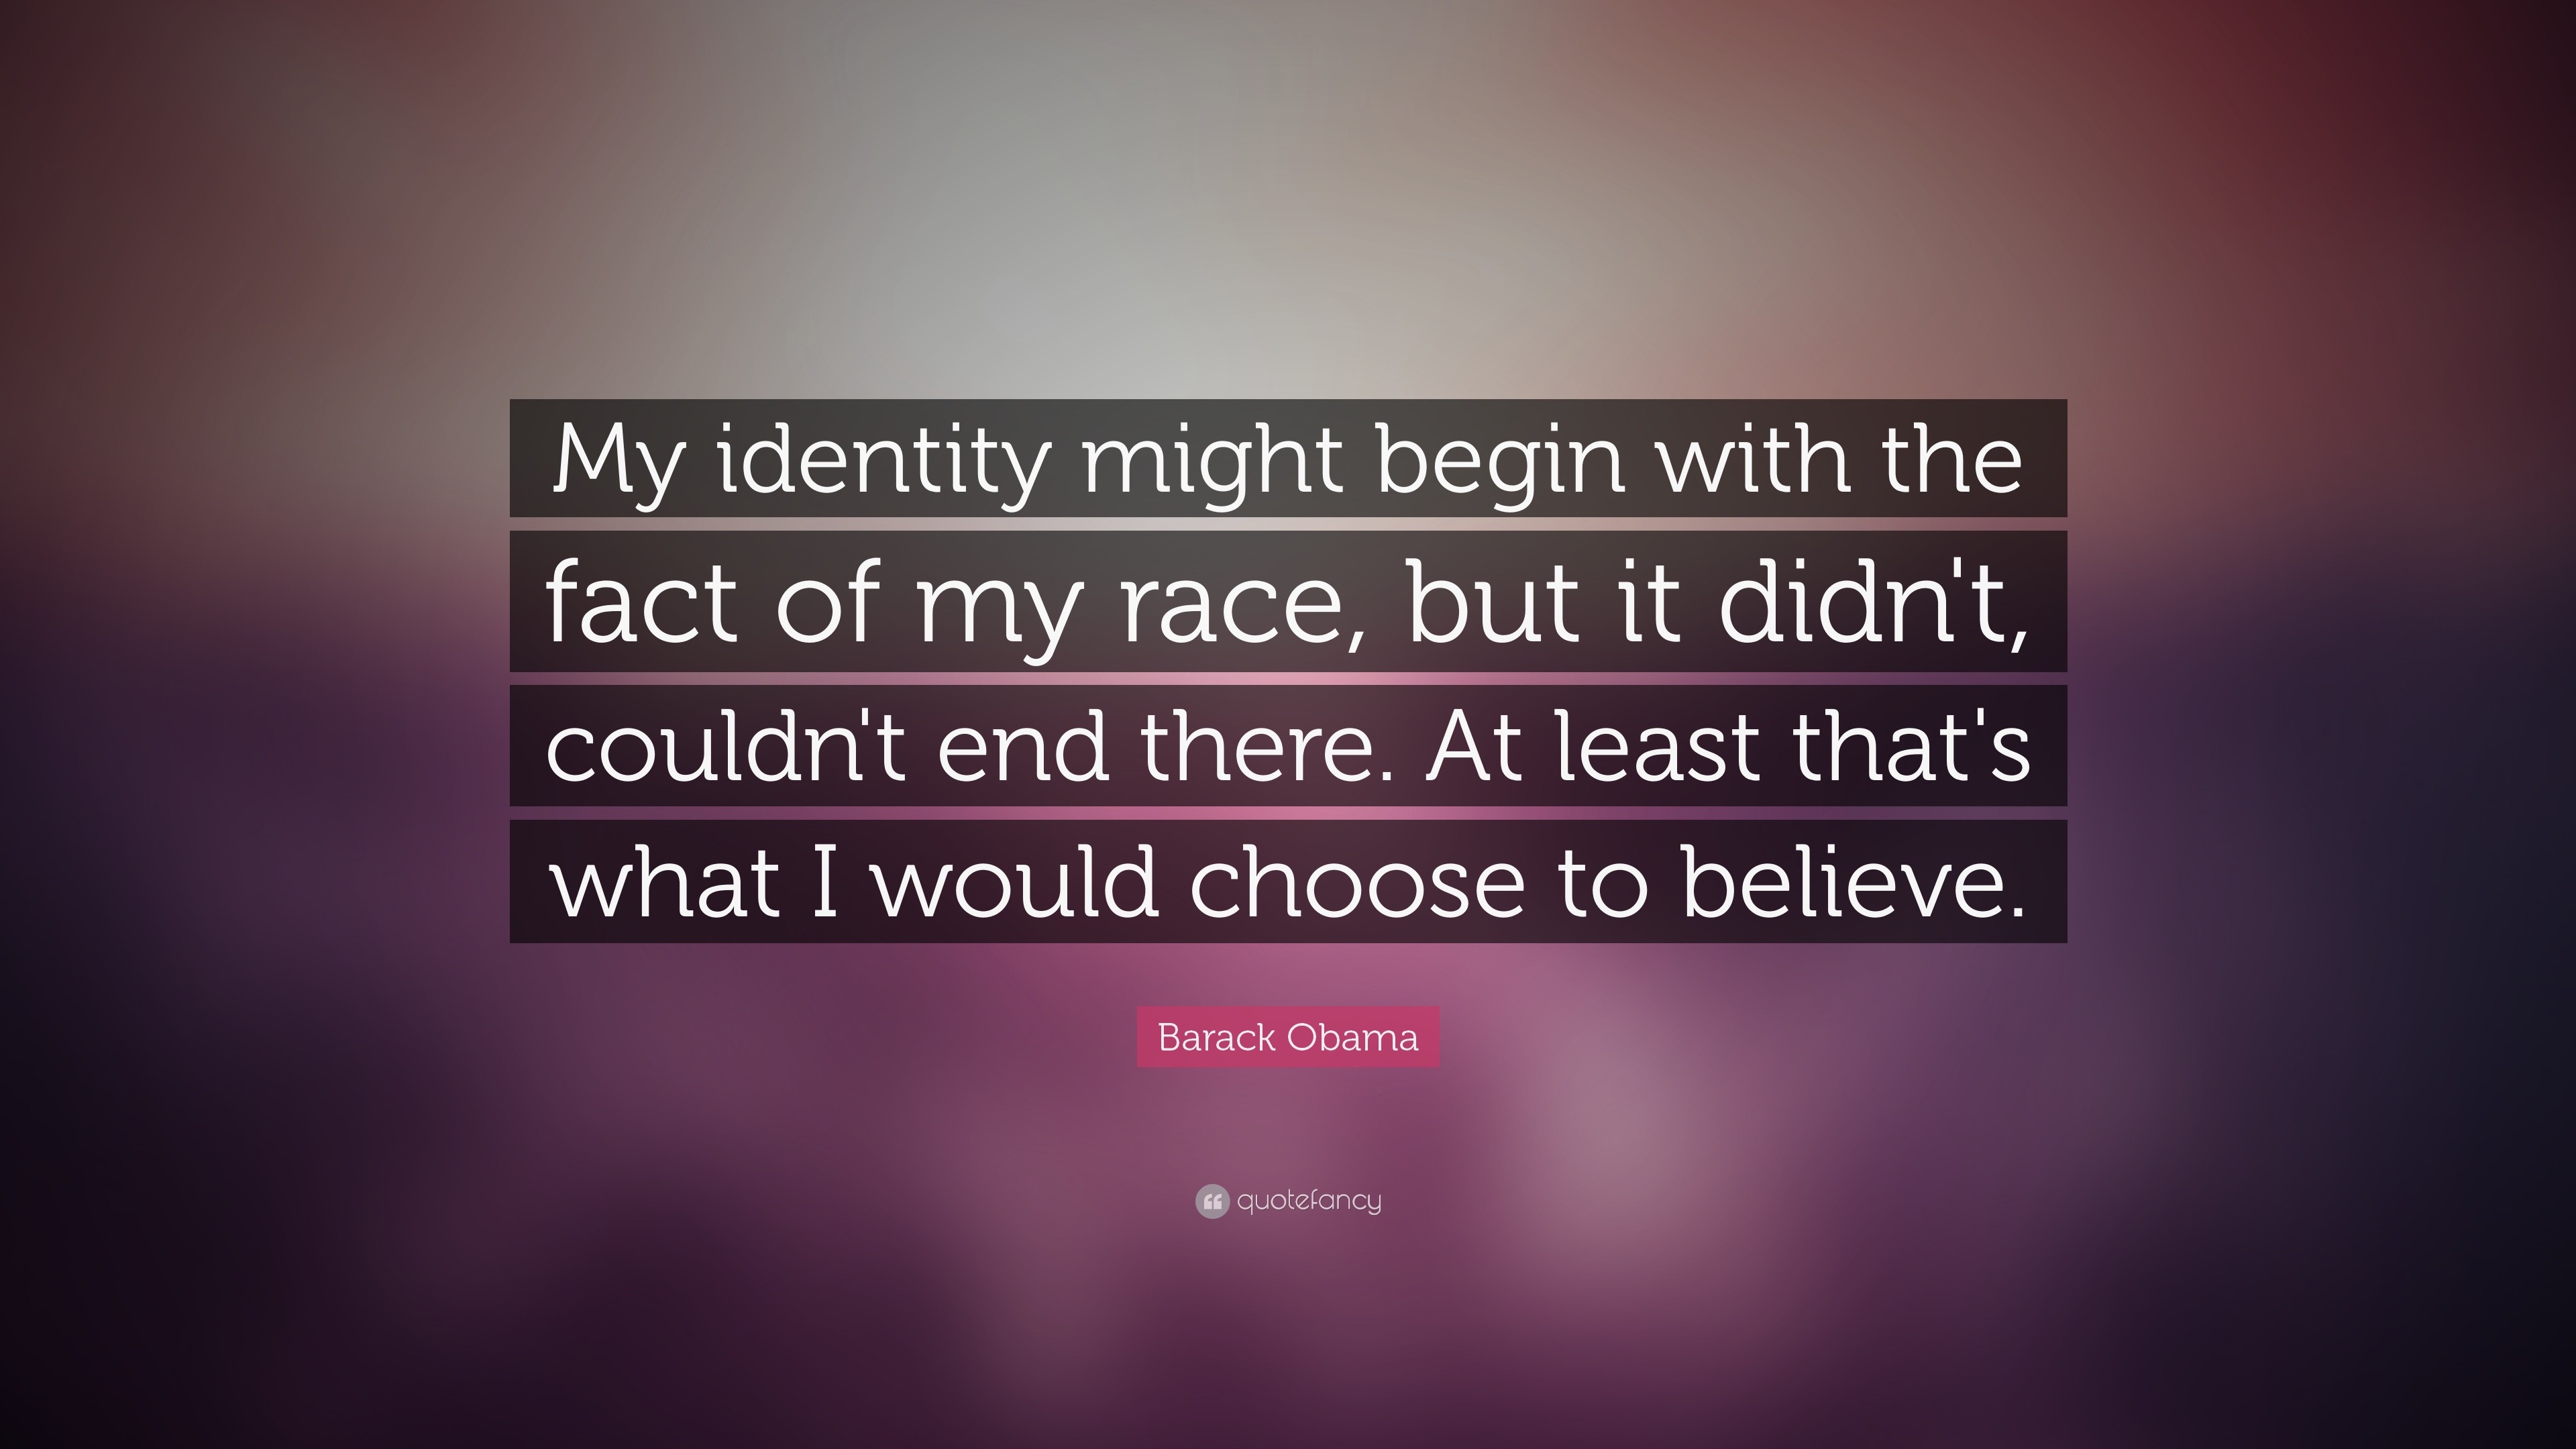 Barack Obama Quote: “My identity might begin with the fact of my race